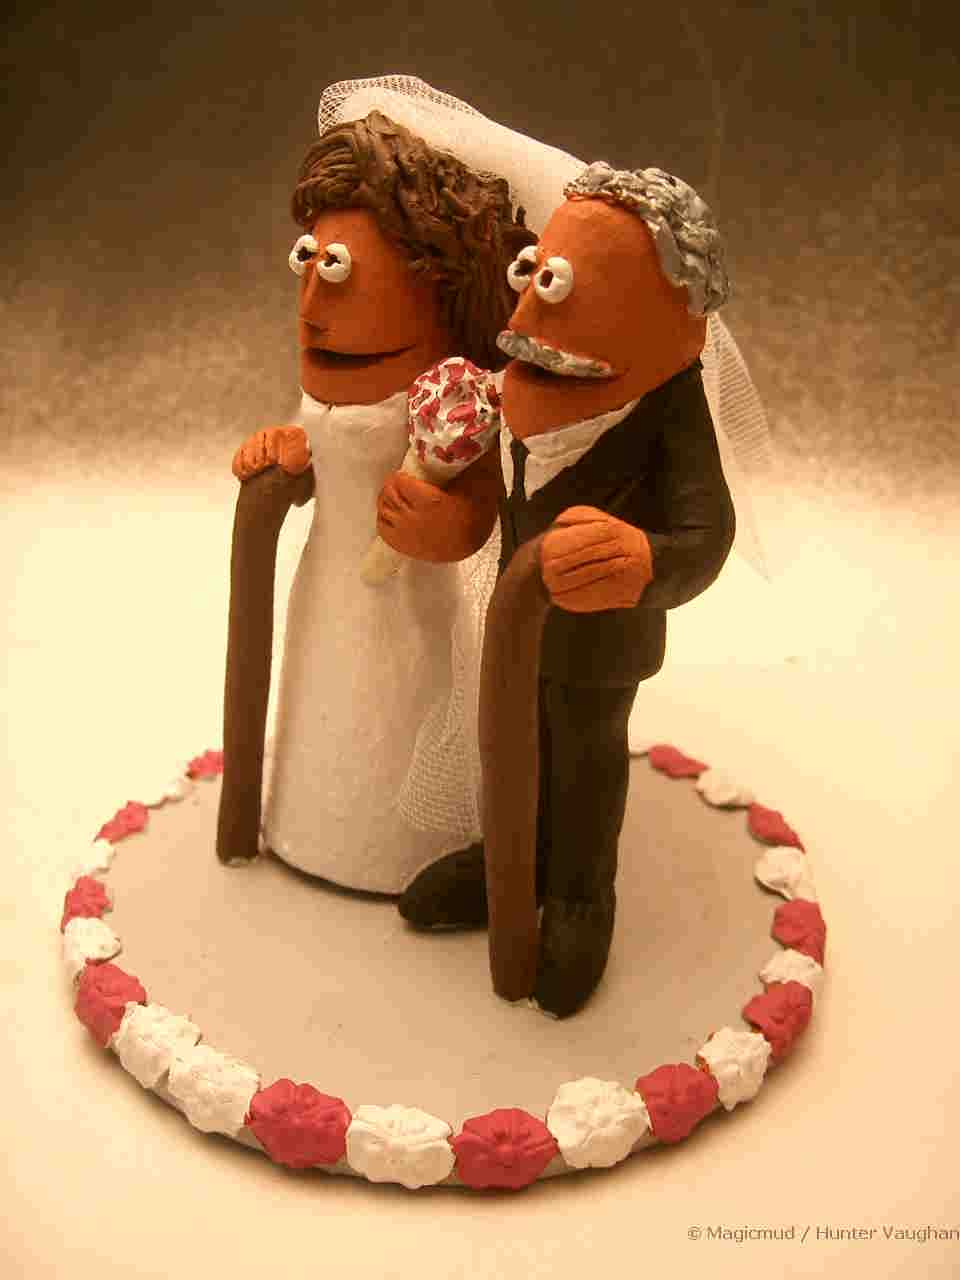 Not too old for Wedding Bells to ring...The Senior Citizen's Wedding Cake Topper